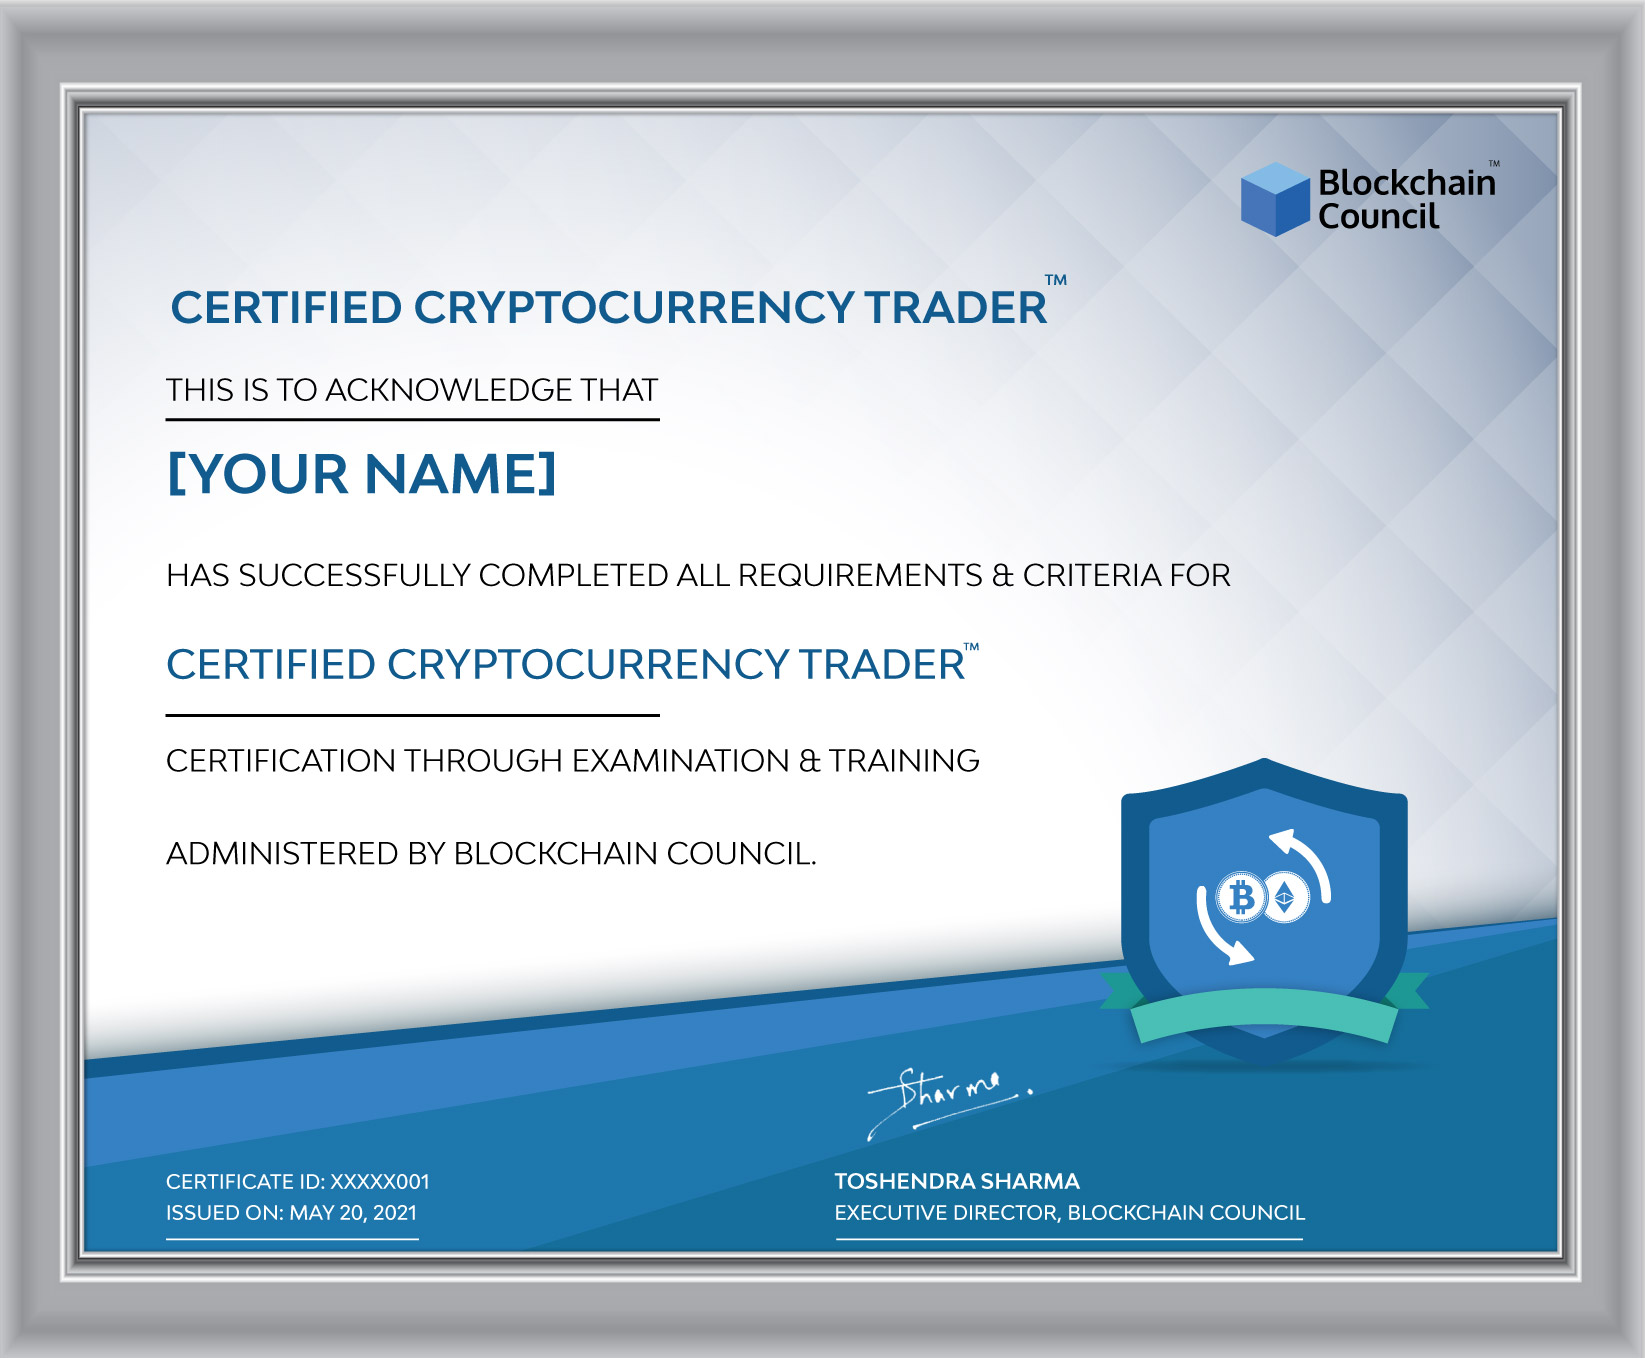 Certified Cryptocurrency Trader™ (CCT)